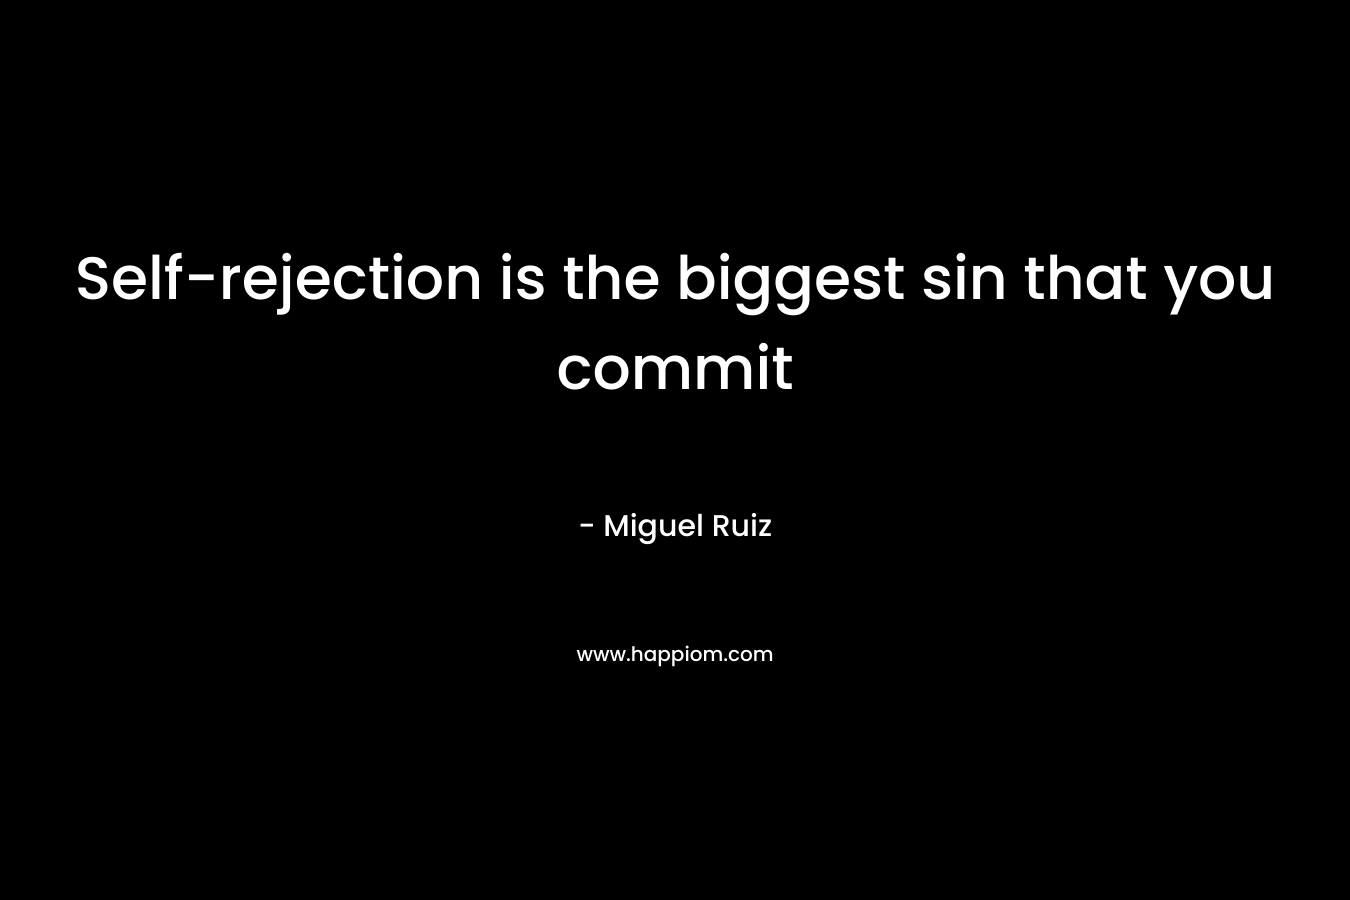 Self-rejection is the biggest sin that you commit